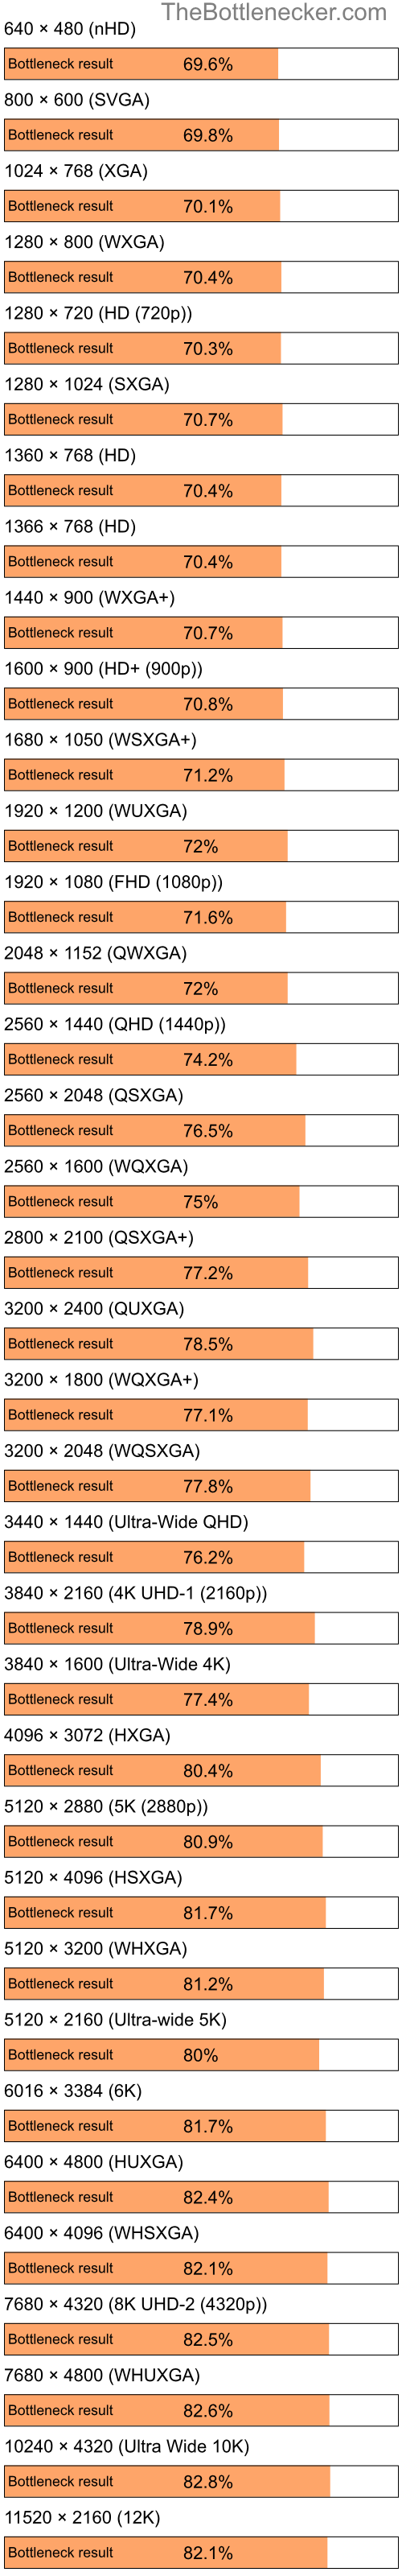 Bottleneck results by resolution for Intel Pentium 4 and AMD Radeon X800GT in Graphic Card Intense Tasks